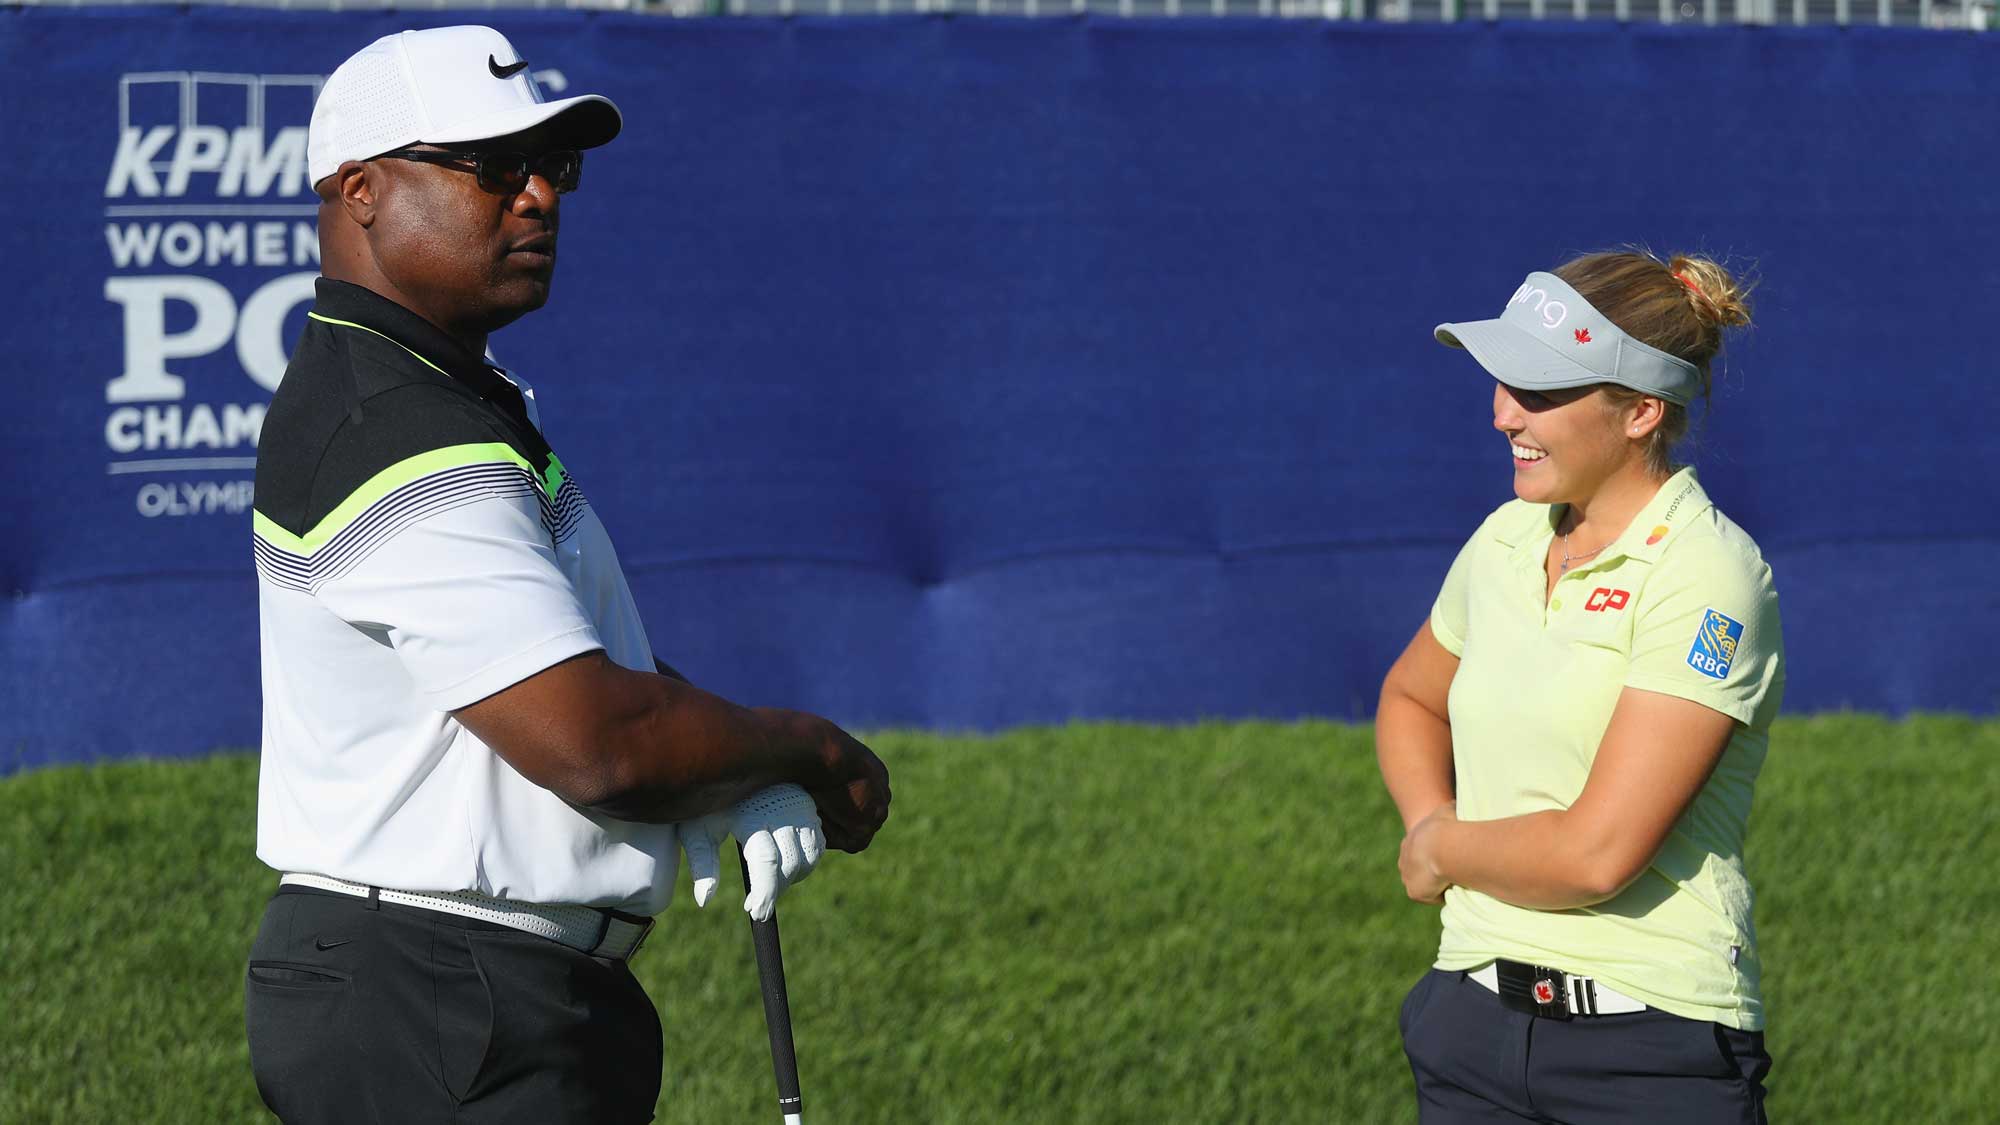 Former NFL star Bo Jackson (L) chats with Brooke Henderson of Canada during the pro-am prior to the start of the 2017 KPMG Women's PGA Championship